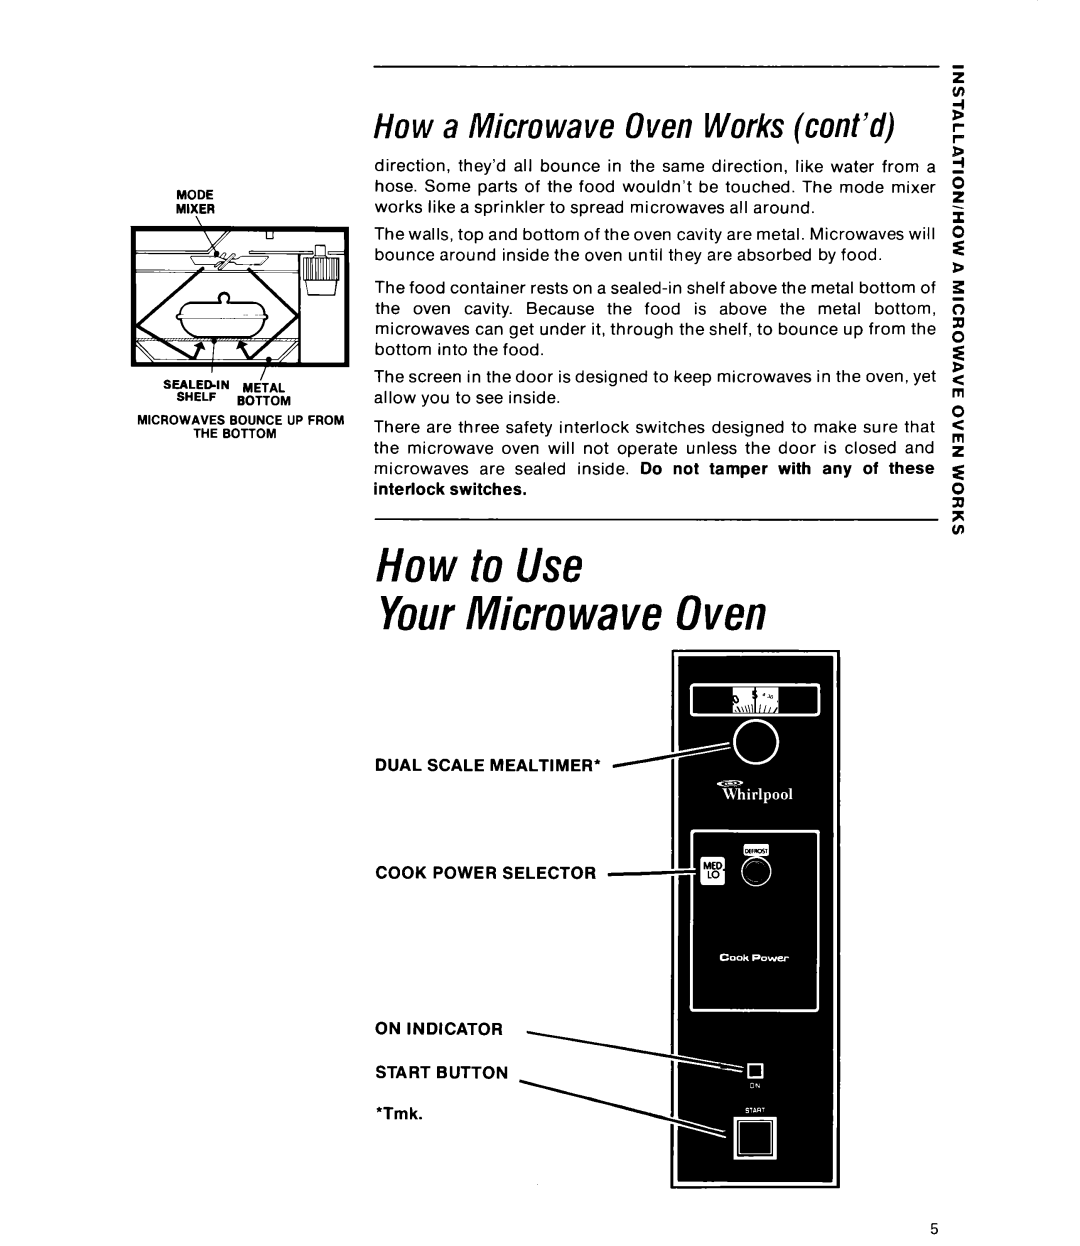 Whirlpool RJM 2840, RJM 7400 manual How to Use YourMicrowave Oven, How a Microwave Oven Workscont’d 